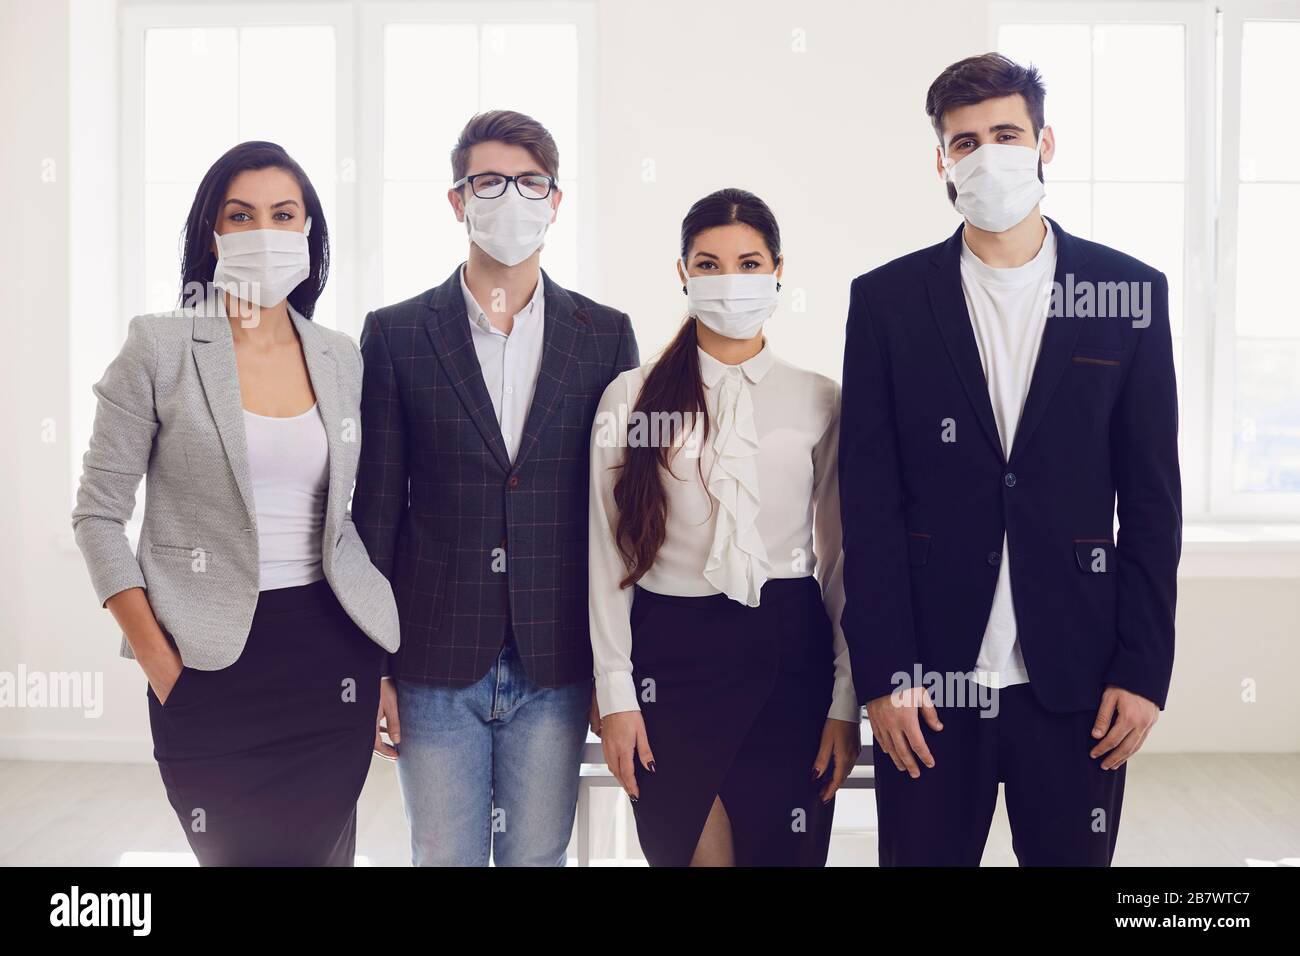 Danger of infection of the virus coronavirus infection. Group people businesspeople in medical mask at office. Stock Photo